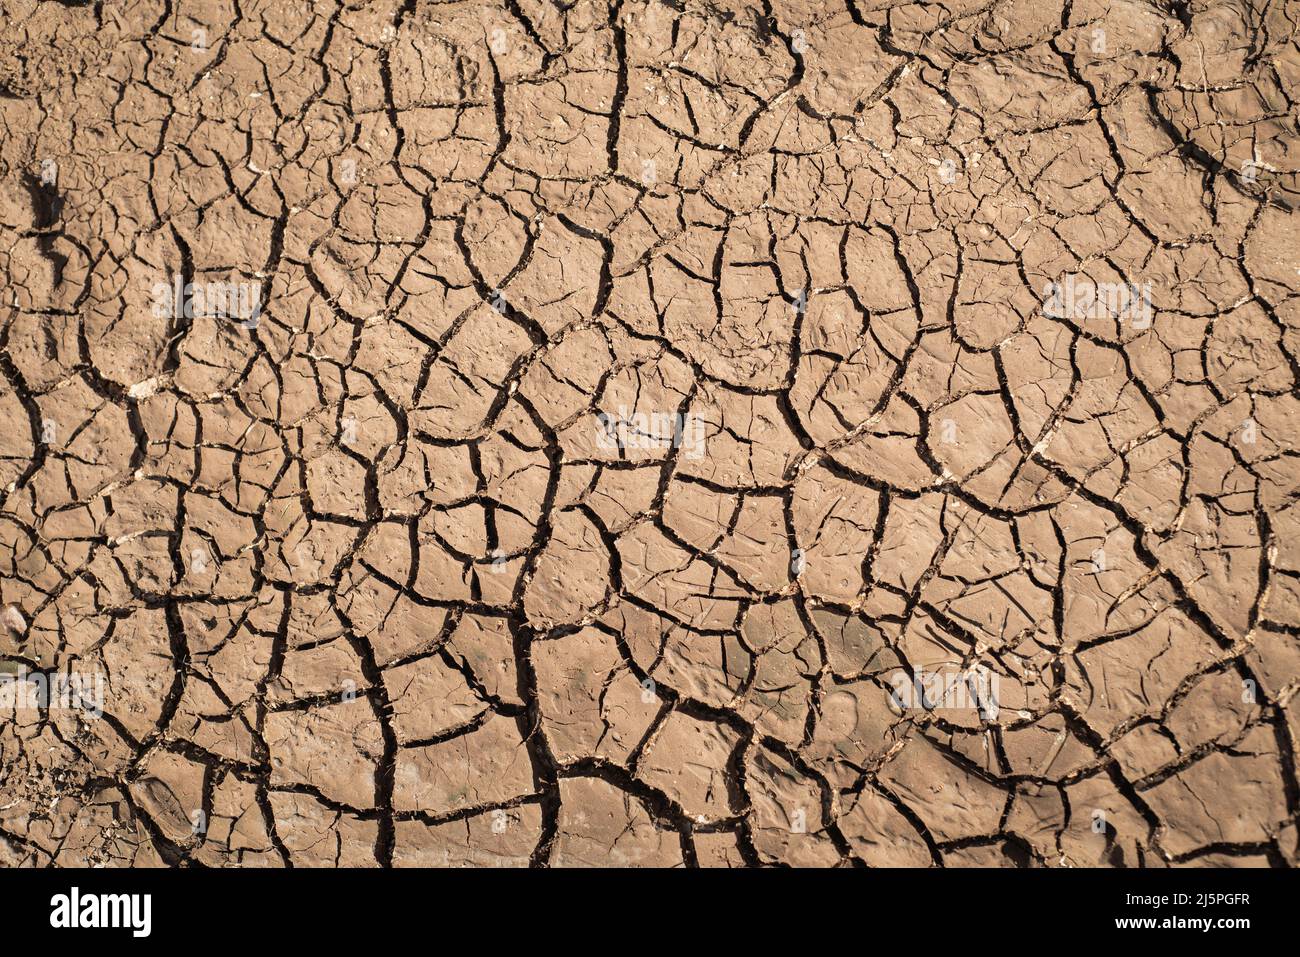 Cracked and dried soil appearance. Global warming and climate change concept and background. Stock Photo